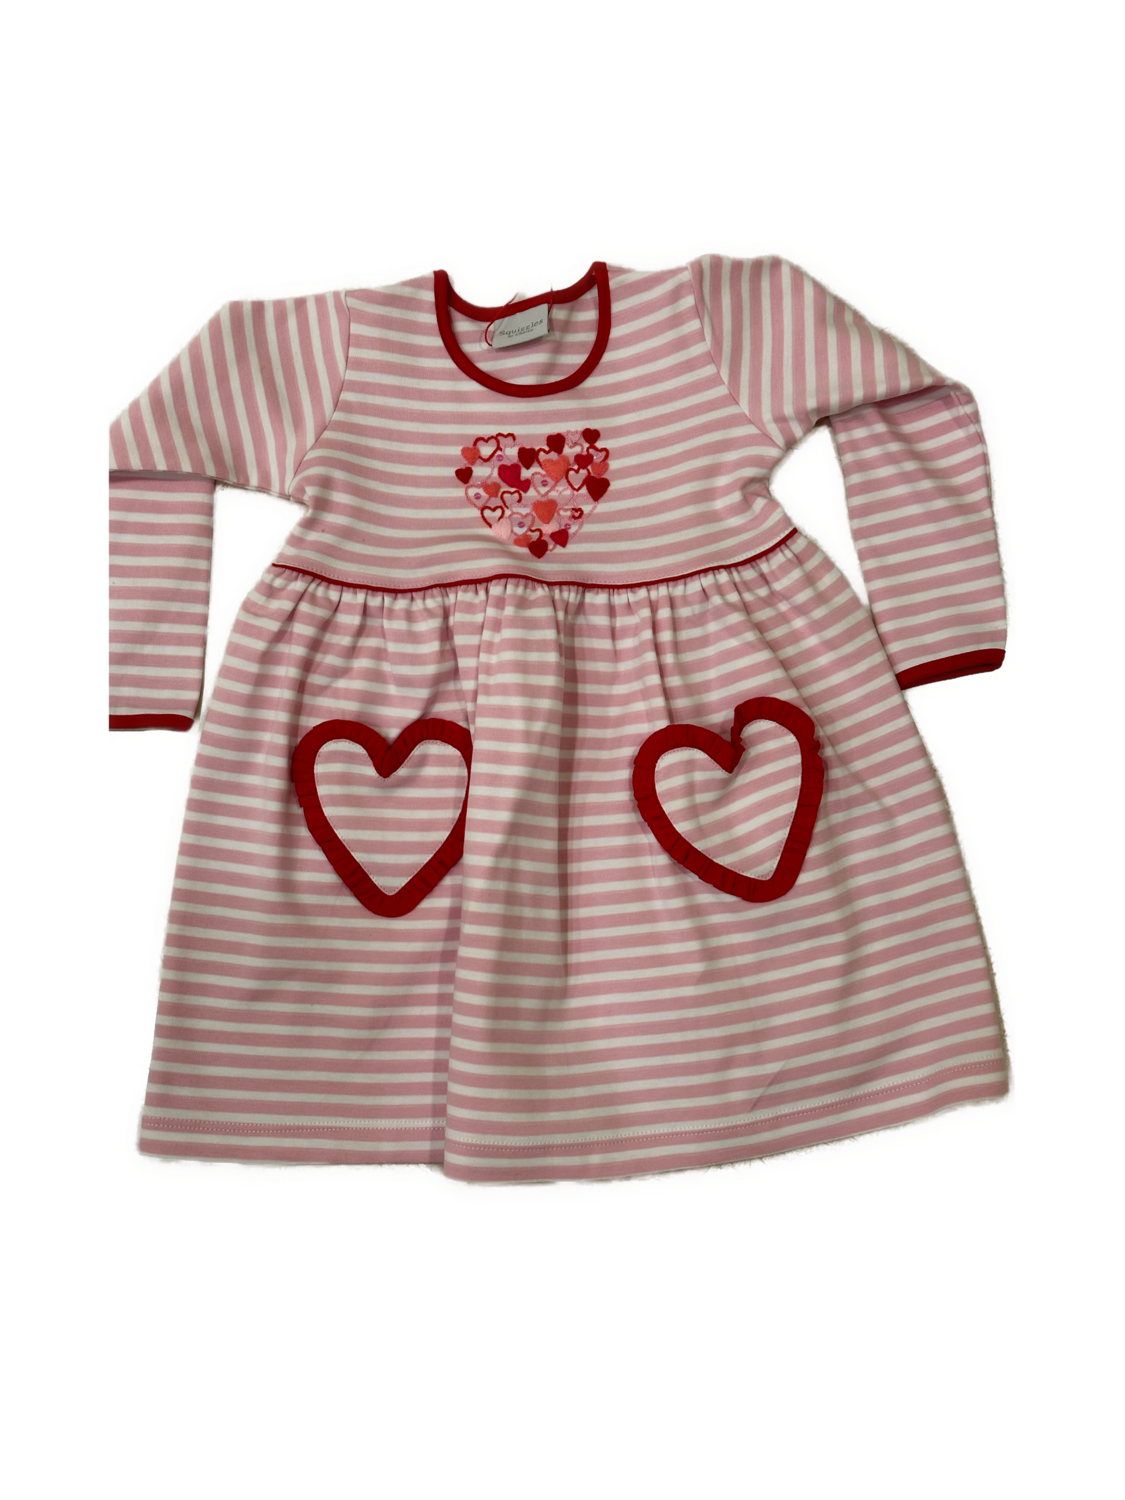 Lovely Hearts Popover Dress, Size: 2T